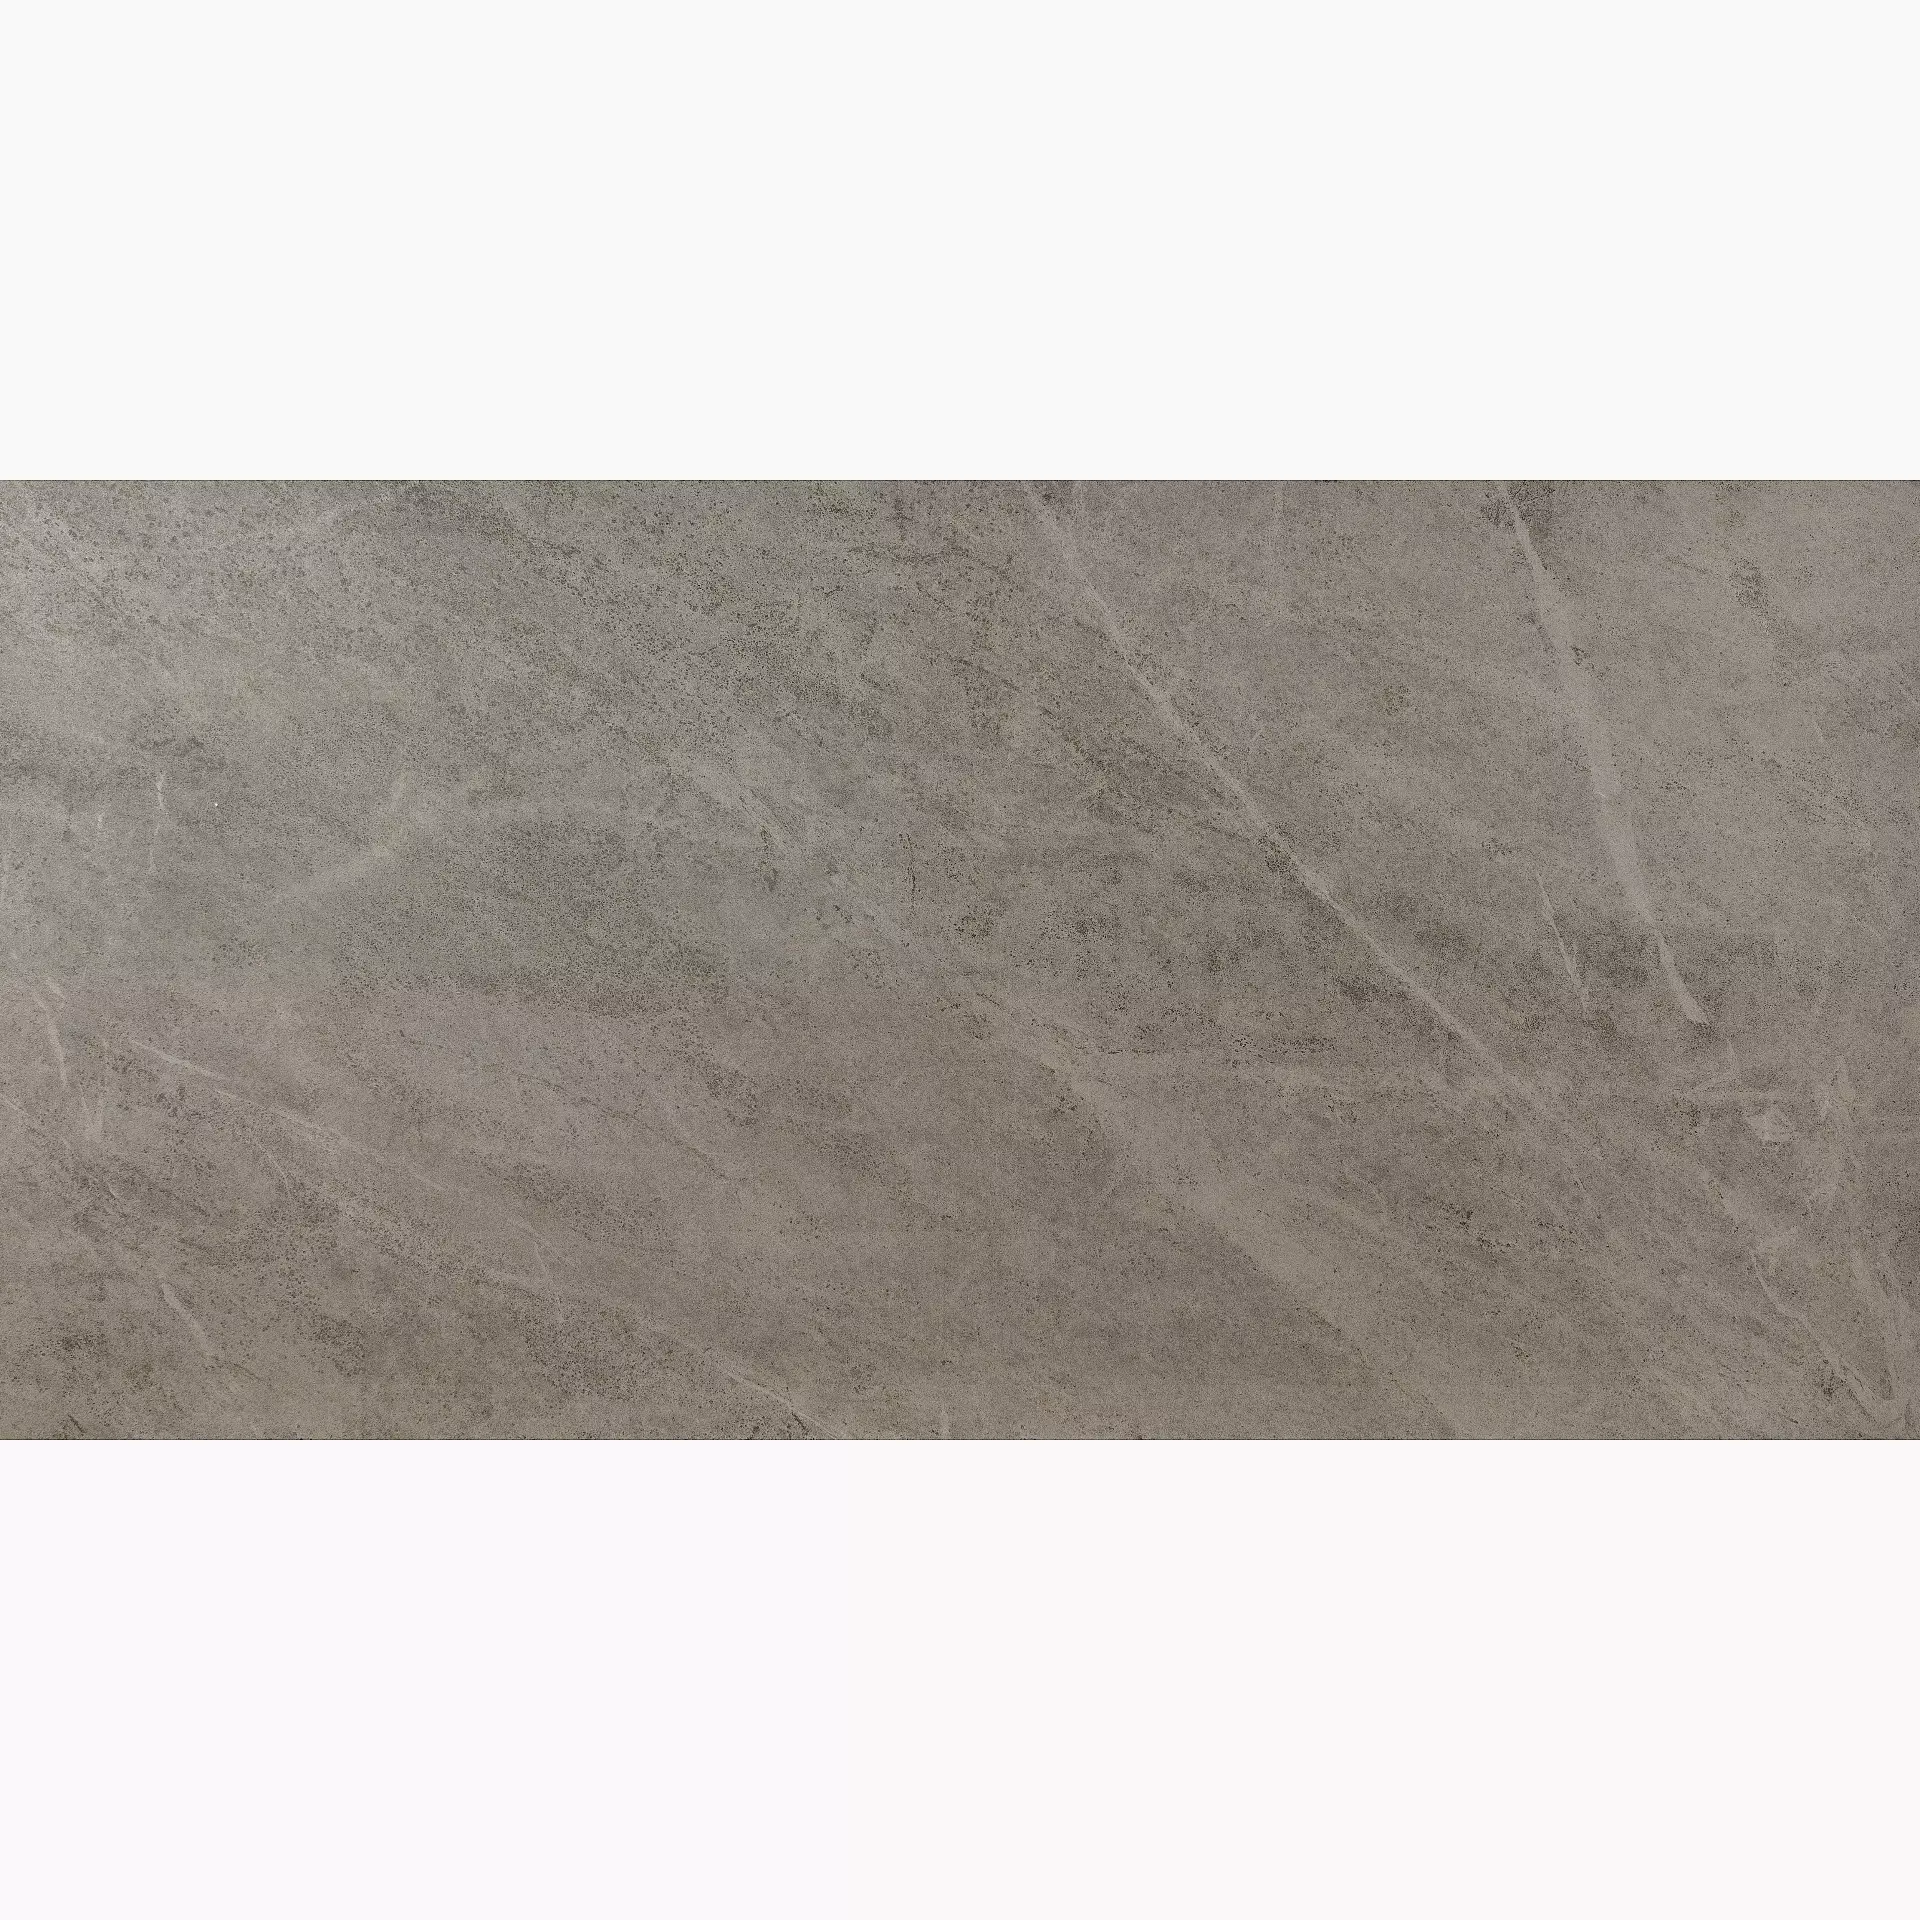 Coem Soap Stone Grey Naturale 0SO363R 30x60cm rectified 9mm